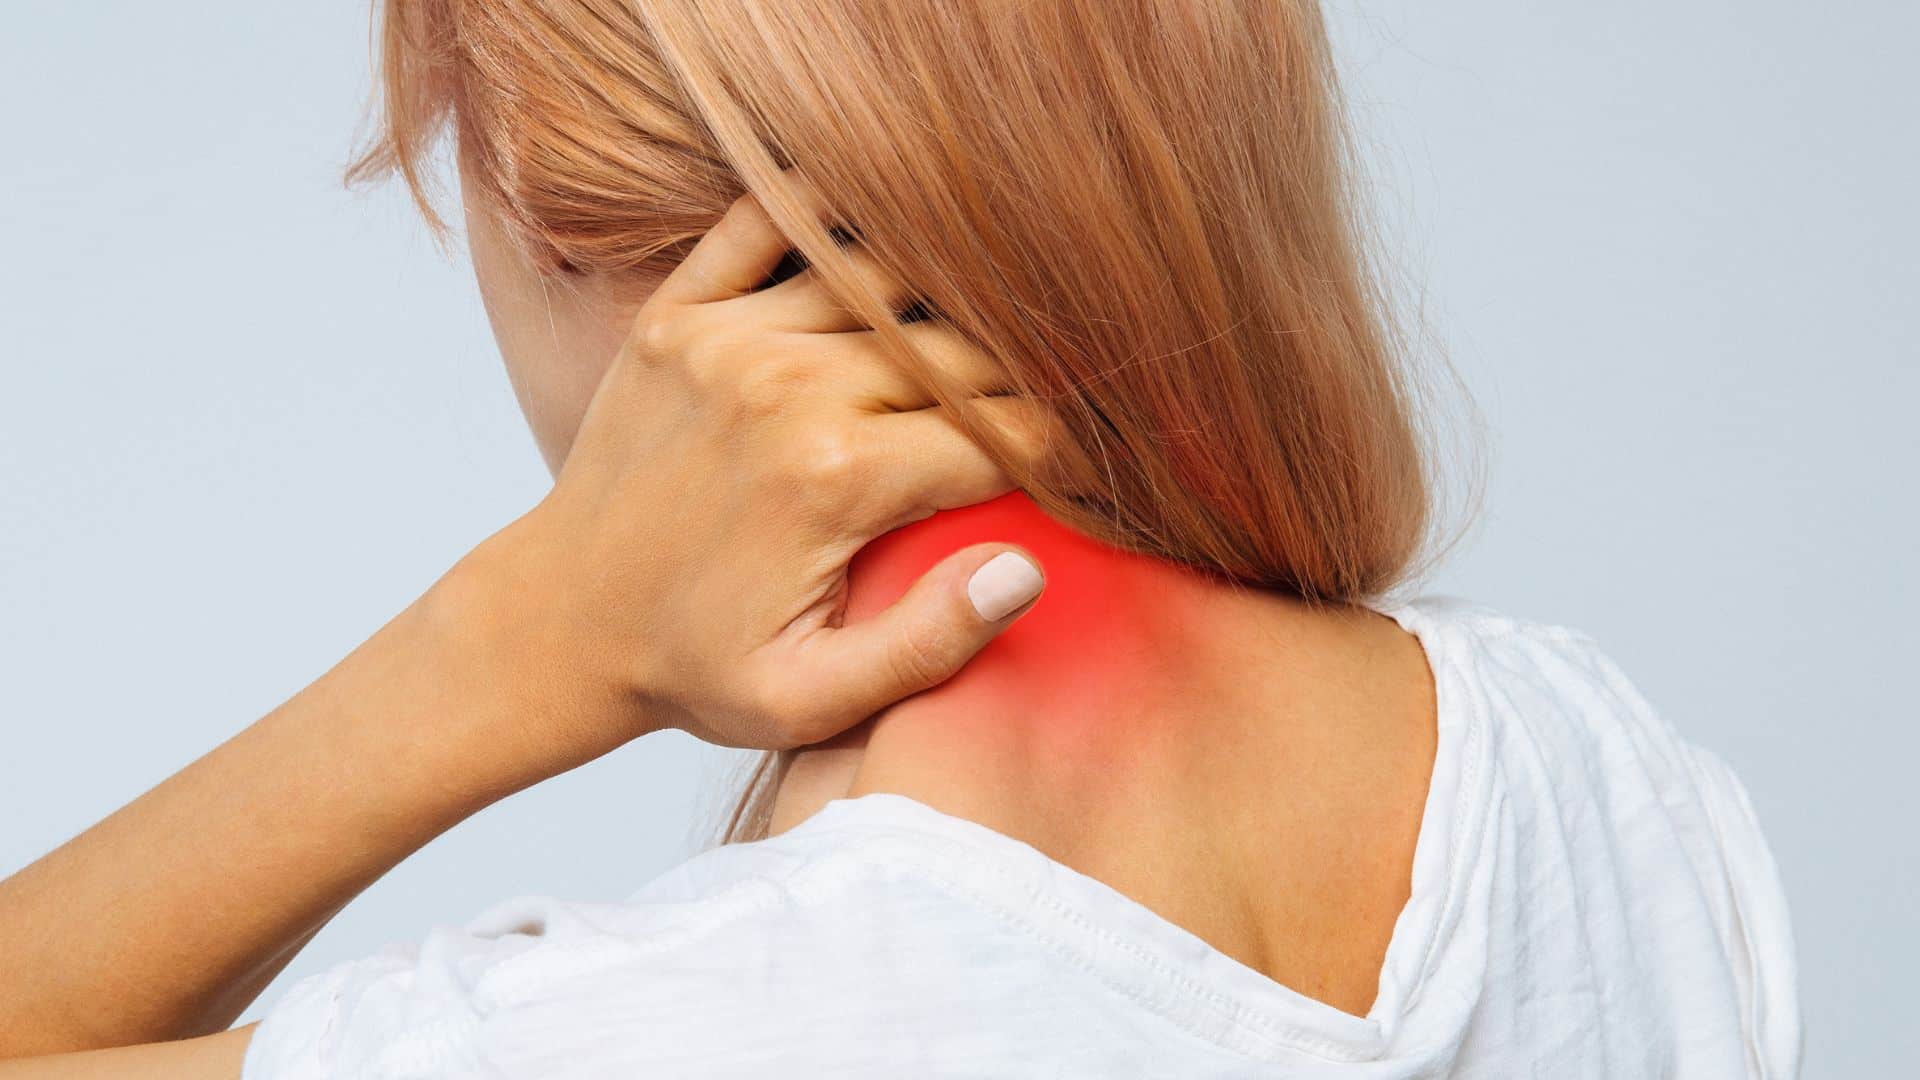 How To Get Rid Of Cervical Pain?